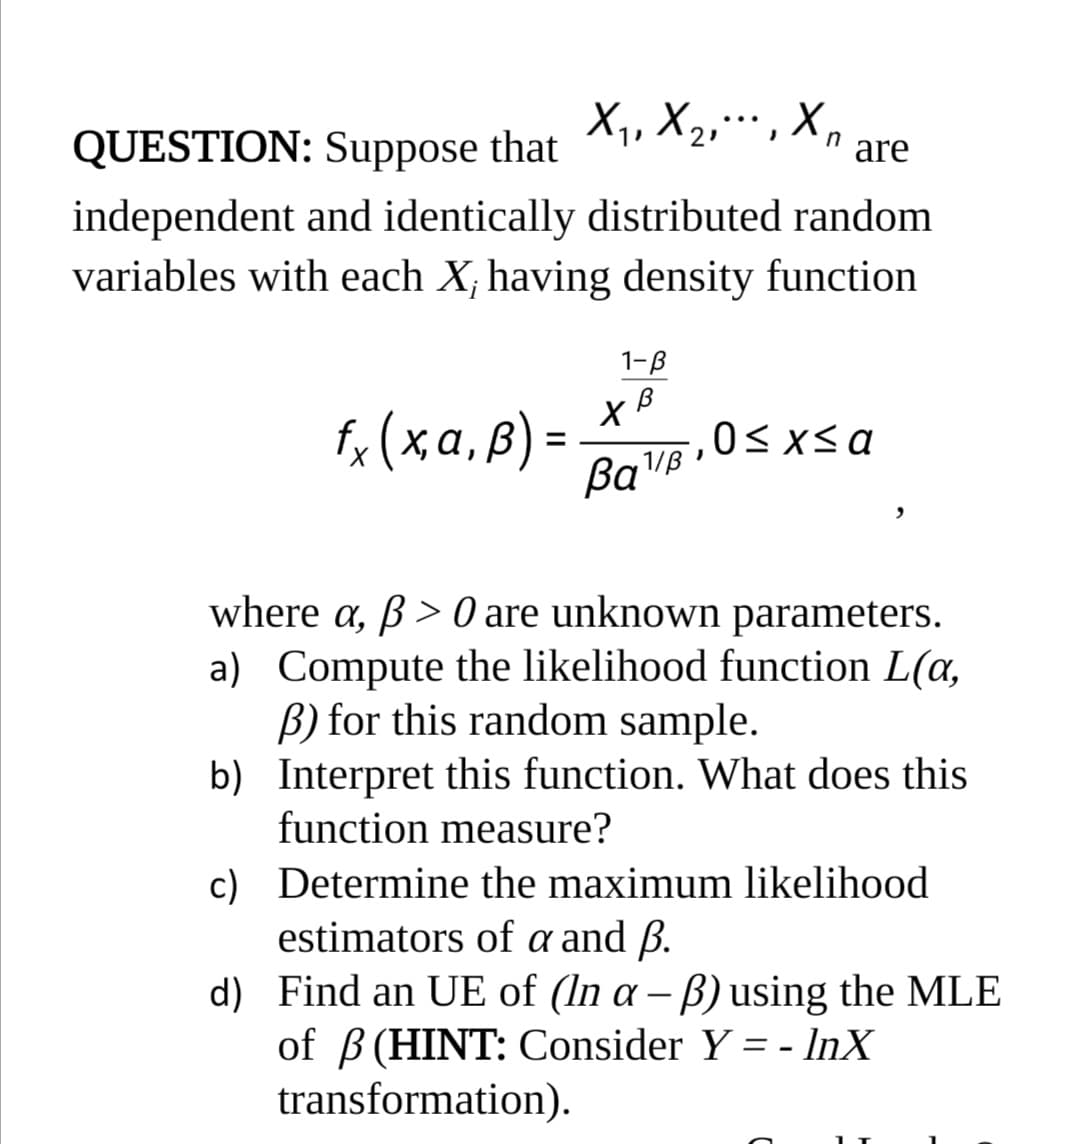 X1, X2,… , X,
QUESTION: Suppose that
n
are
independent and identically distributed random
variables with each X, having density function
1-B
fo (xa, B) =
,0<xsa
%3D
where a, ß > 0 are unknown parameters.
a) Compute the likelihood function L(a,
B) for this random sample.
b) Interpret this function. What does this
function measure?
c) Determine the maximum likelihood
estimators of a and ß.
d) Find an UE of (In a – B) using the MLE
of B (HINT: Consider Y = - InX
transformation).
